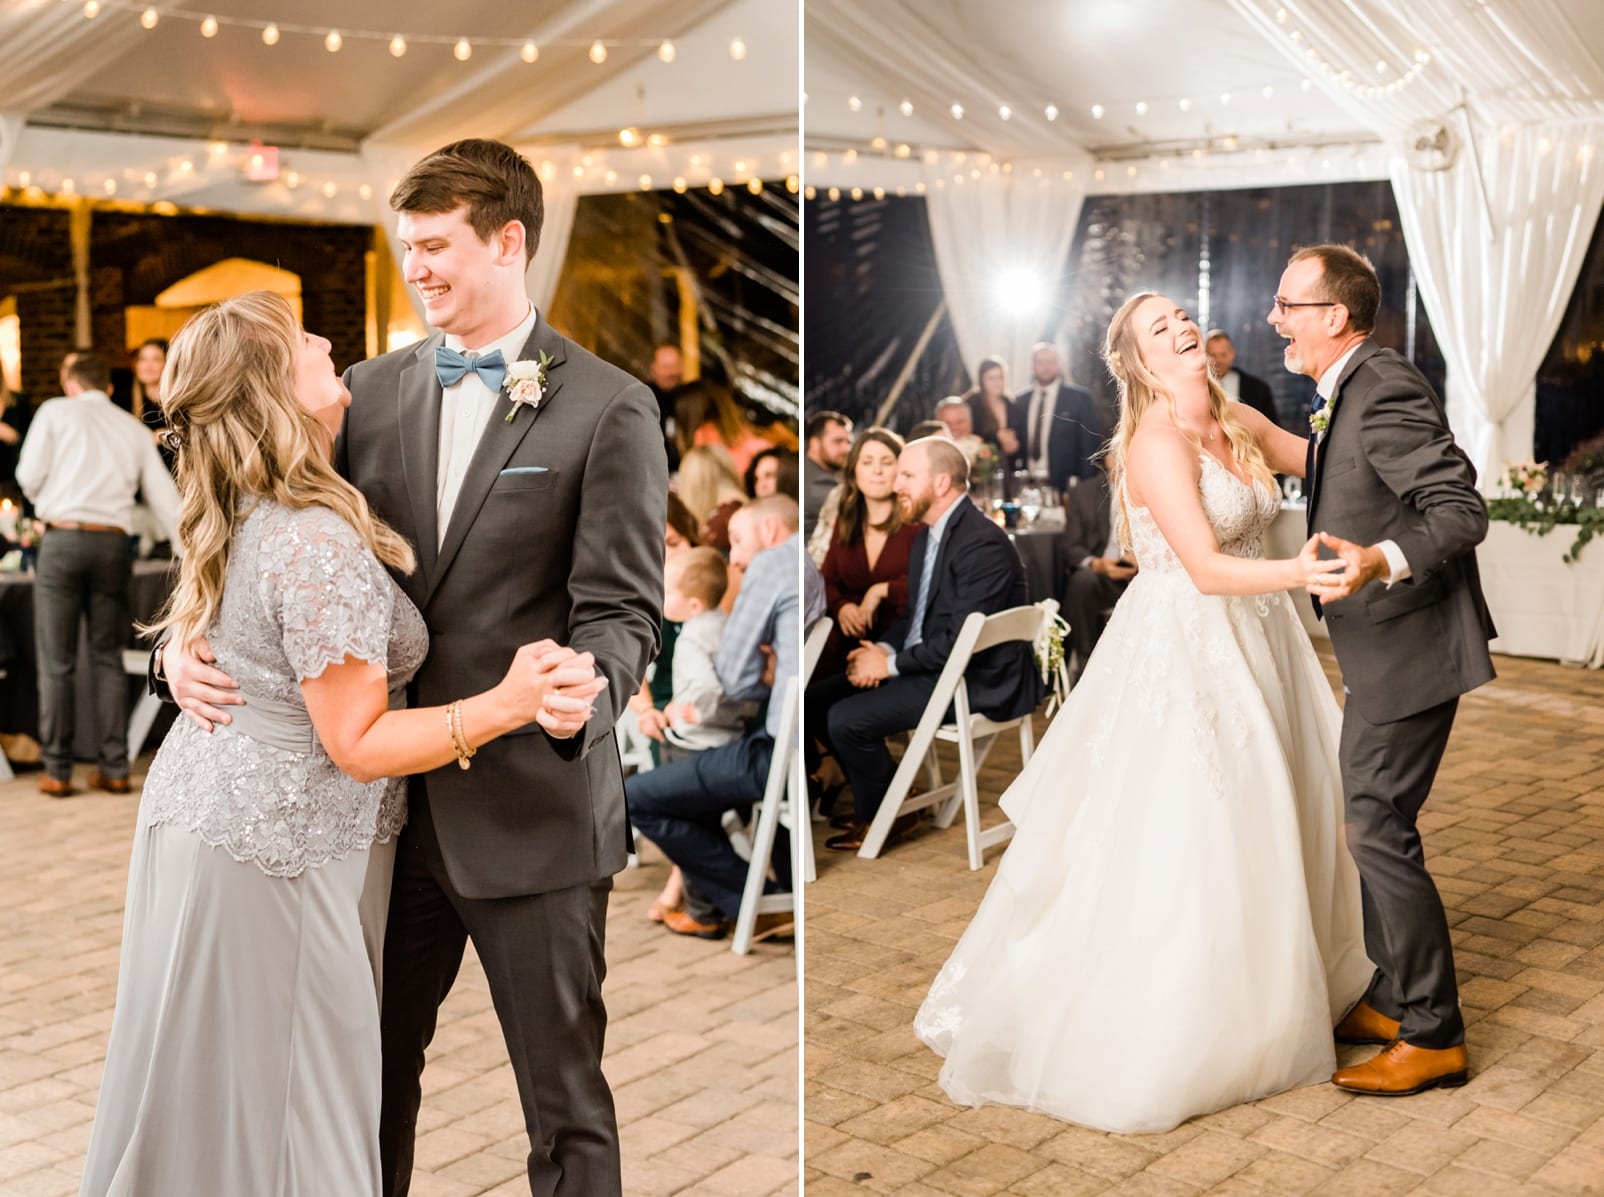 Oaks at Salem bride dancing with her father and groom dancing with her mother photo